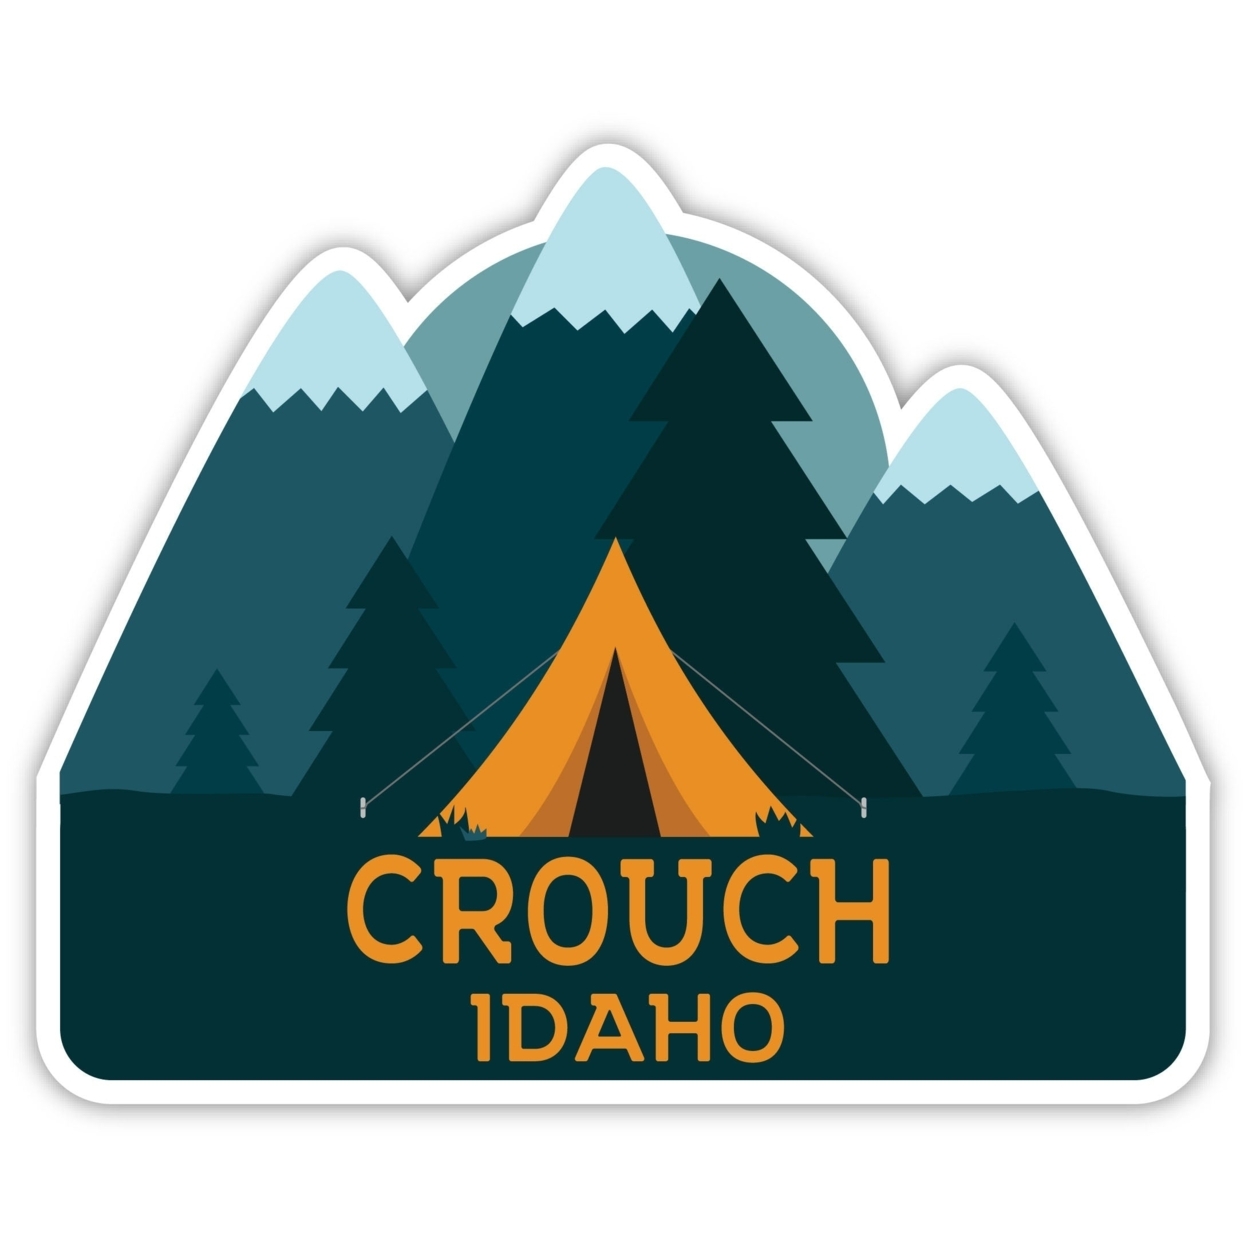 Crouch Idaho Souvenir Decorative Stickers (Choose Theme And Size) - 4-Pack, 4-Inch, Tent